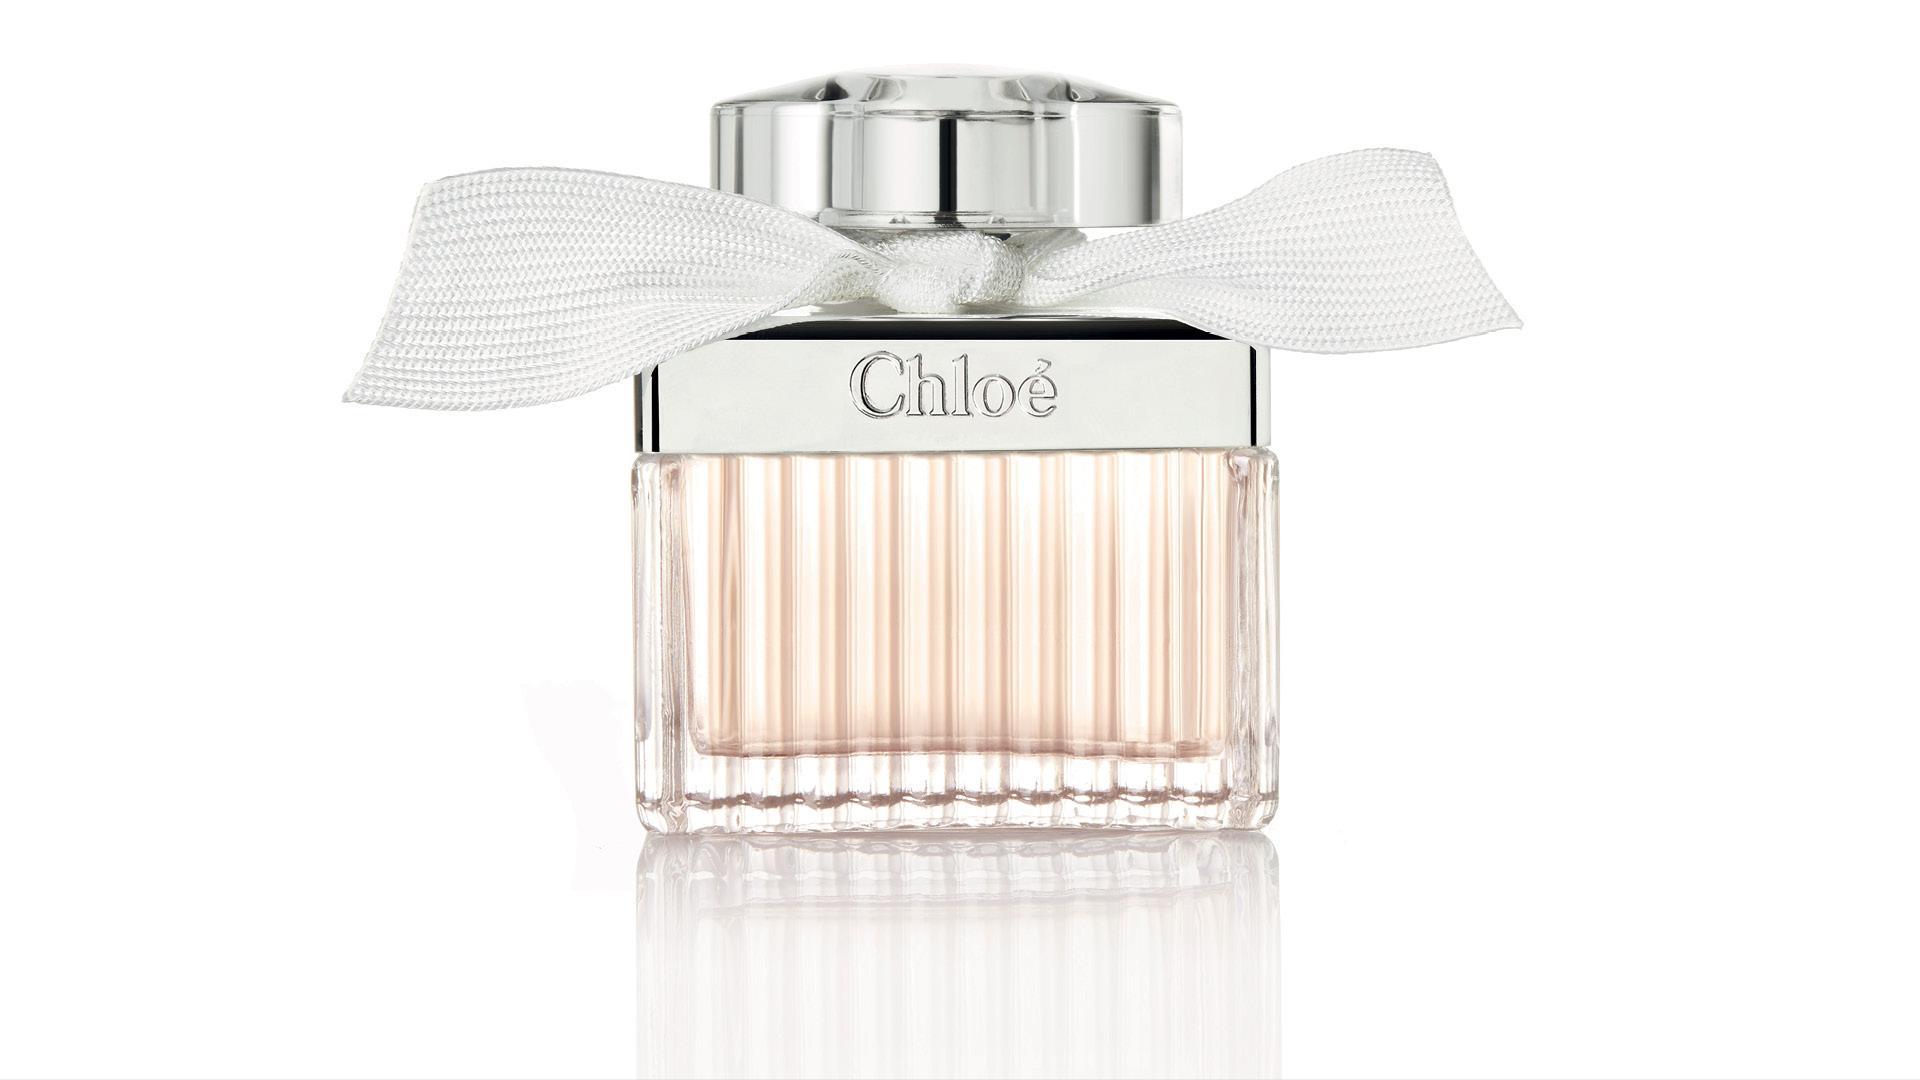 Chloé Announce The New Face Of Their Iconic Fragrance